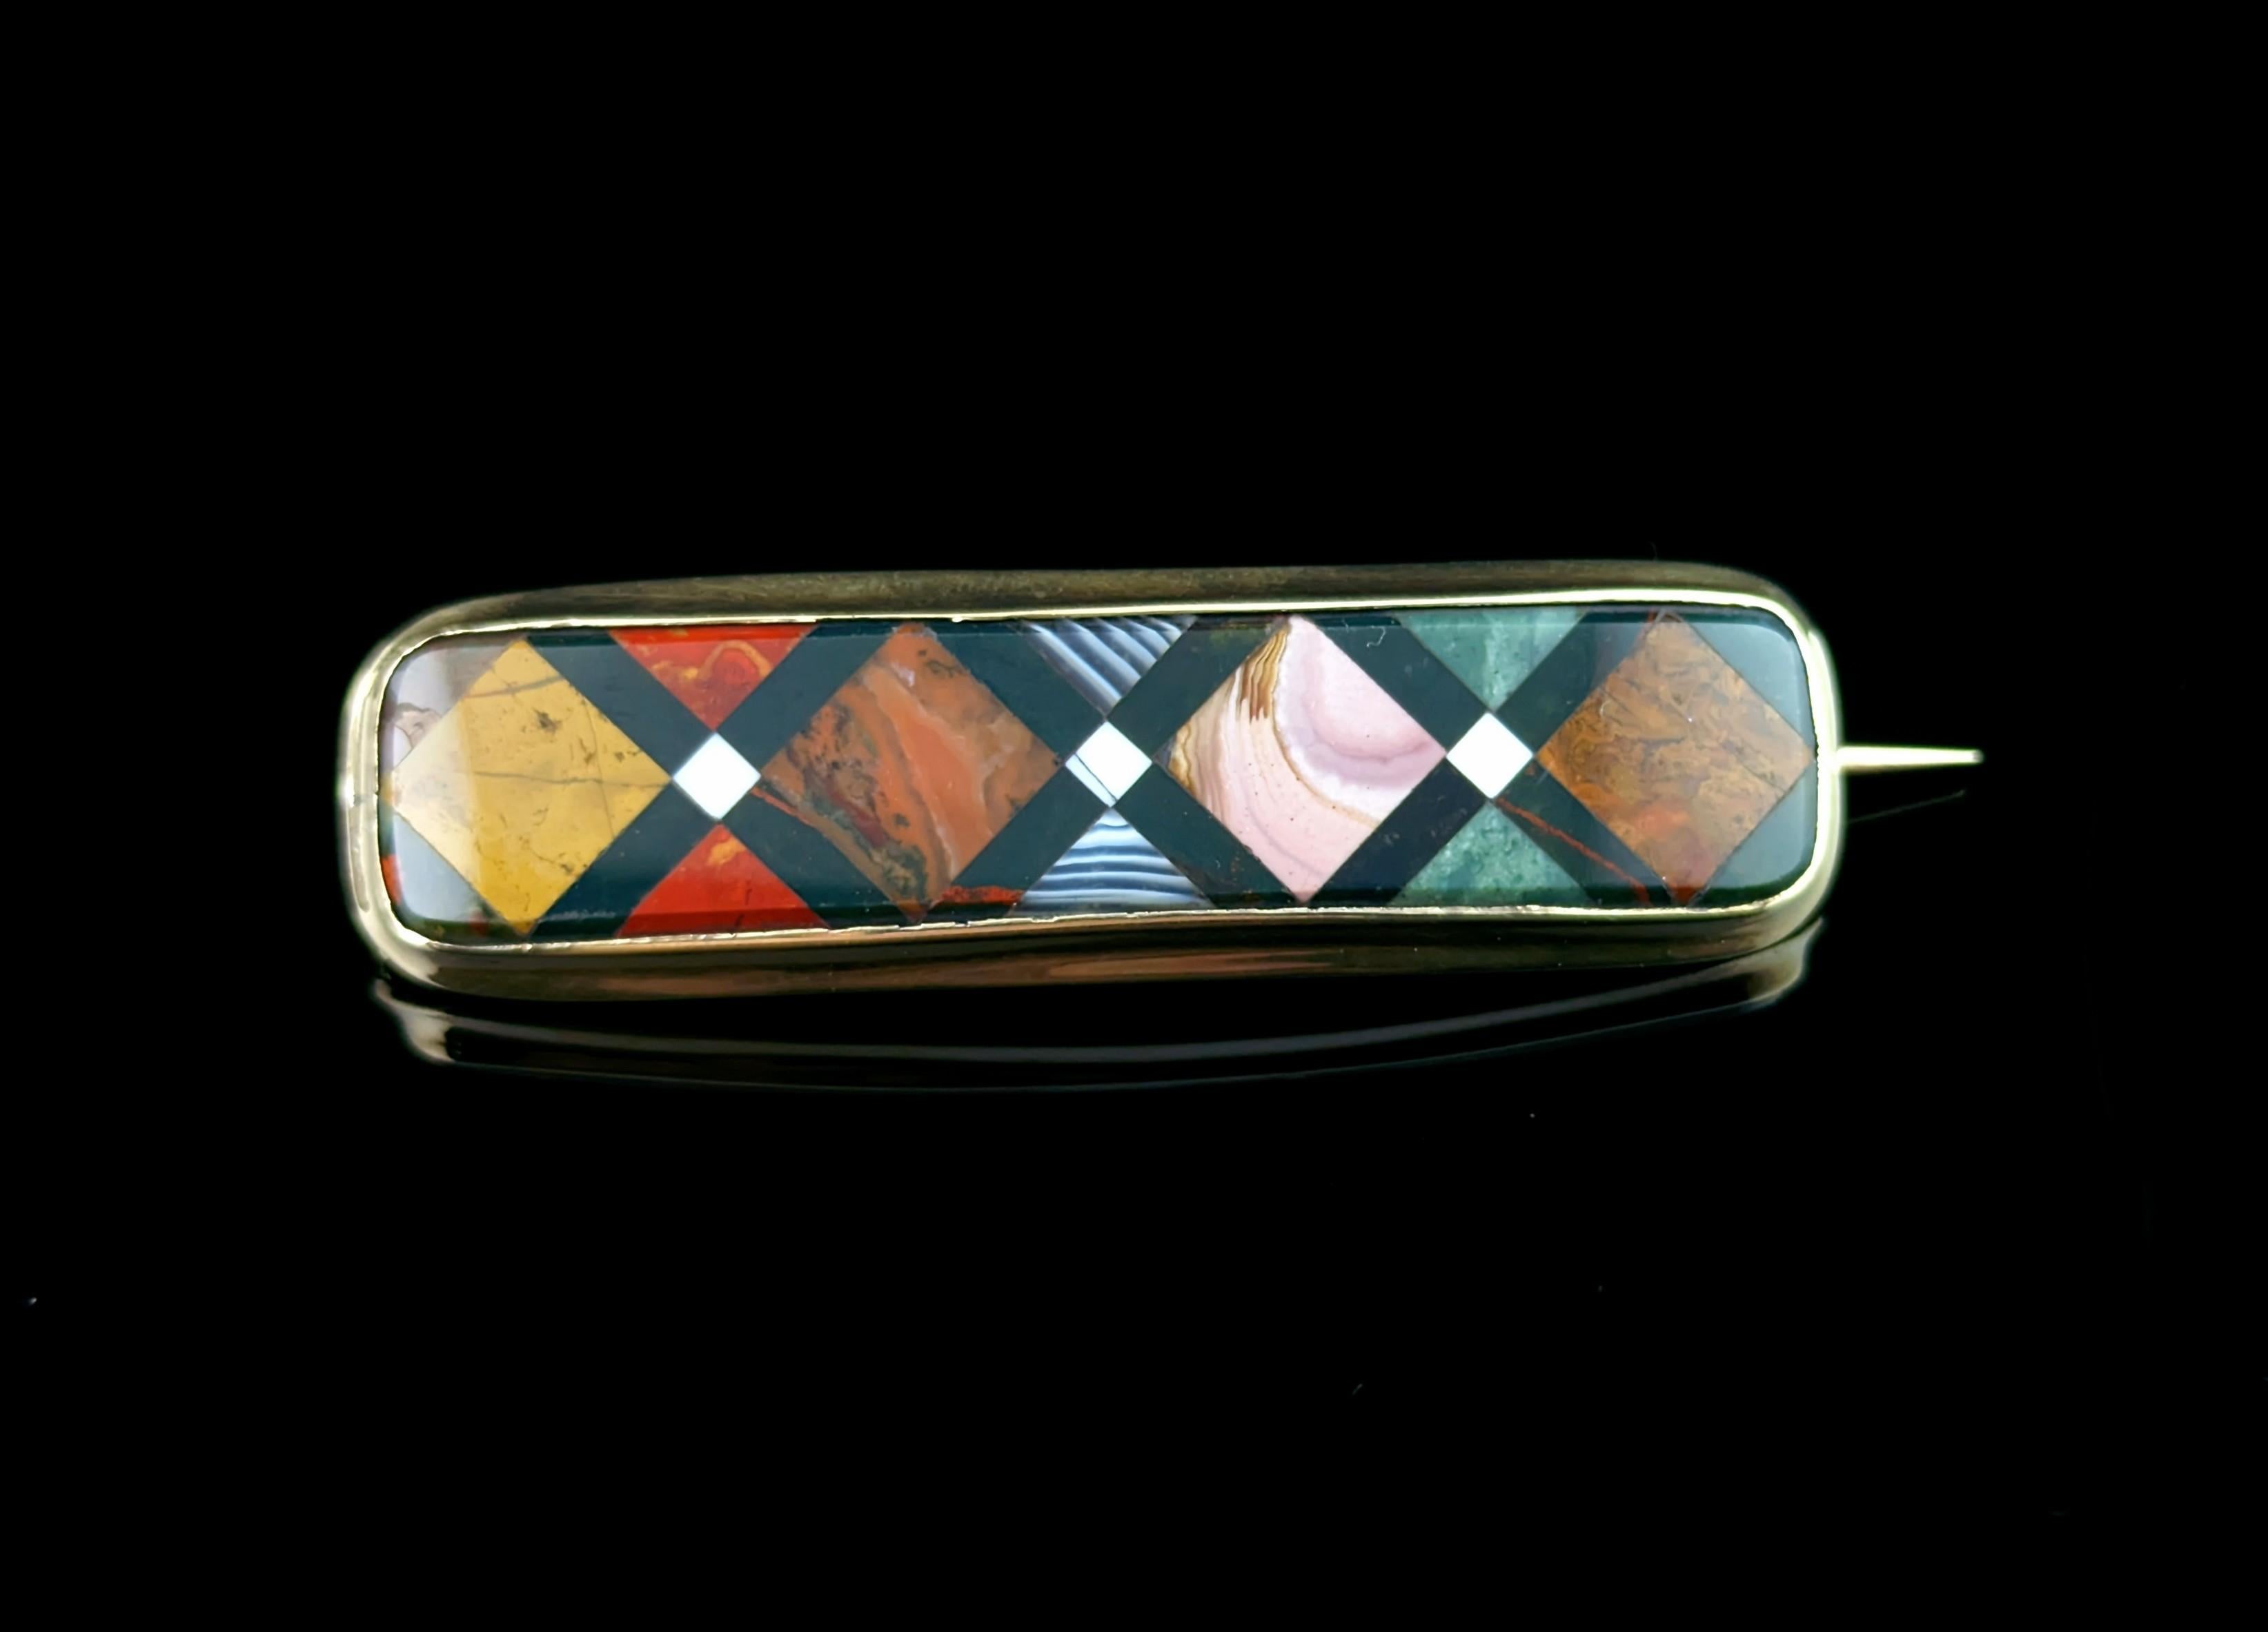 We love this unusual antique, early Victorian era Scottish pebble agate brooch.

It has a unique shape and design made up of smooth polished sections of various different agates, in a cross cross or diamond shaped design.

The warm gold bezel frame